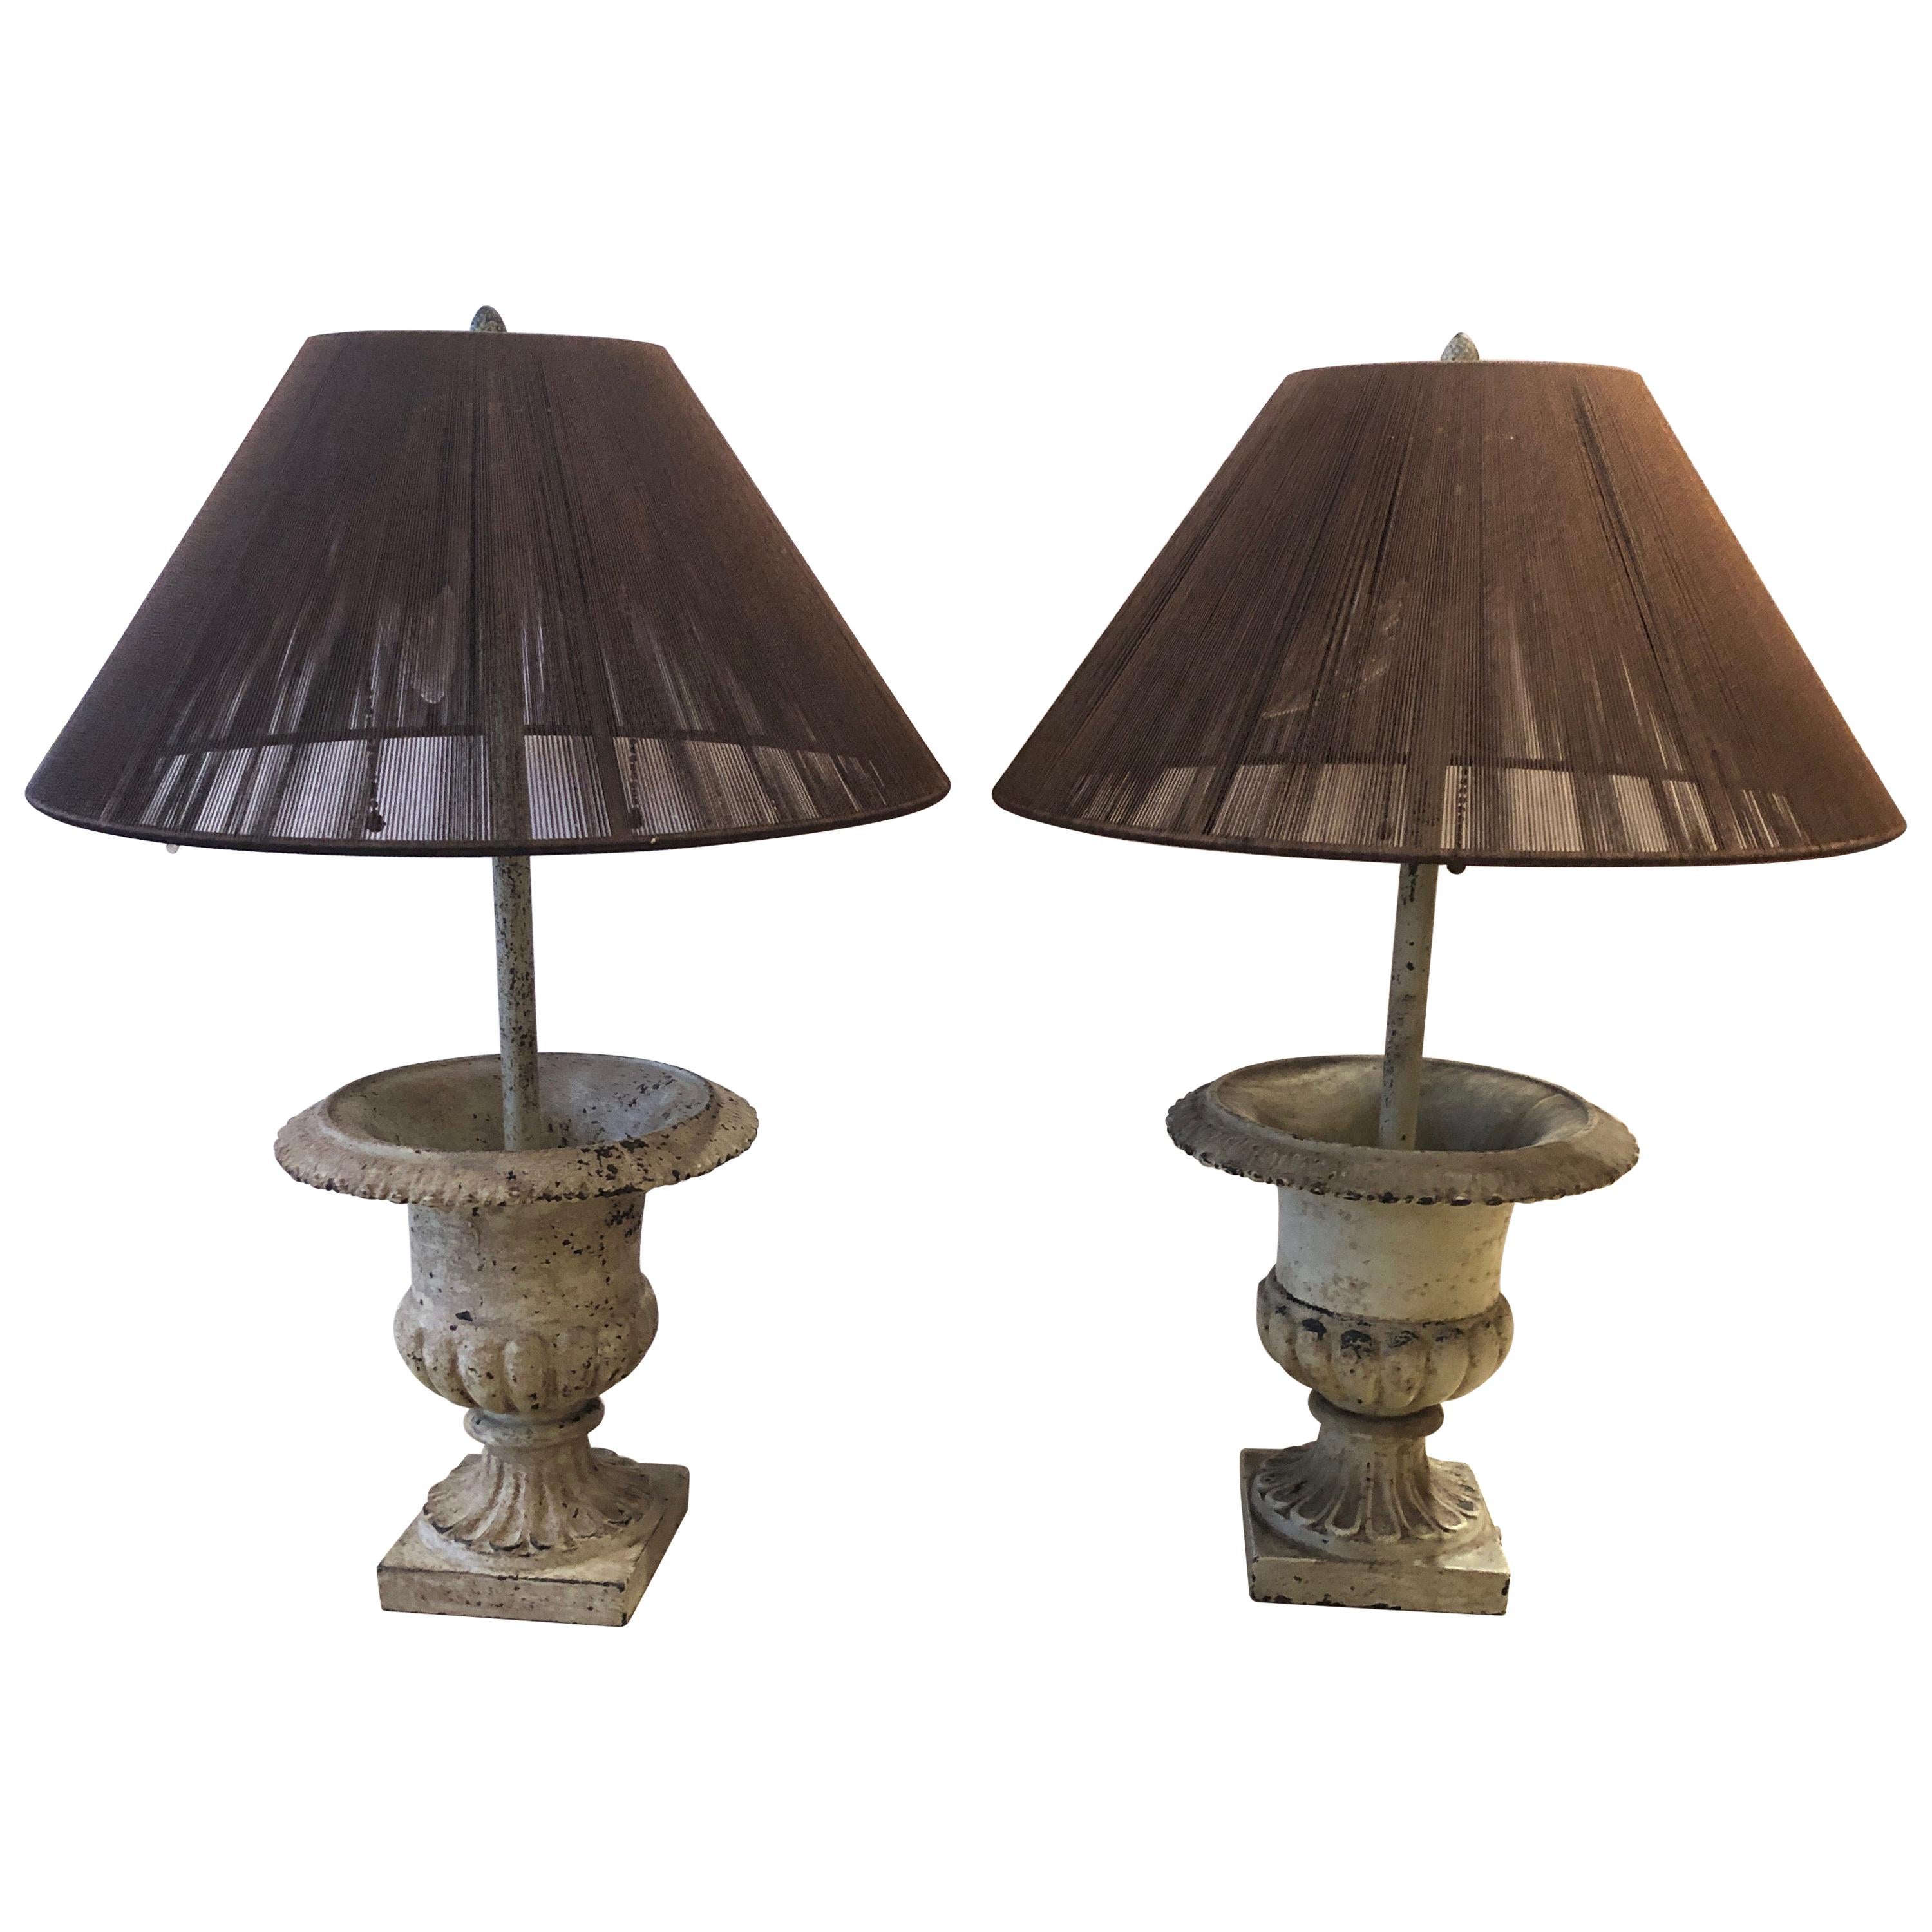 Pair of Charming Iron Garden Urn Table Lamps